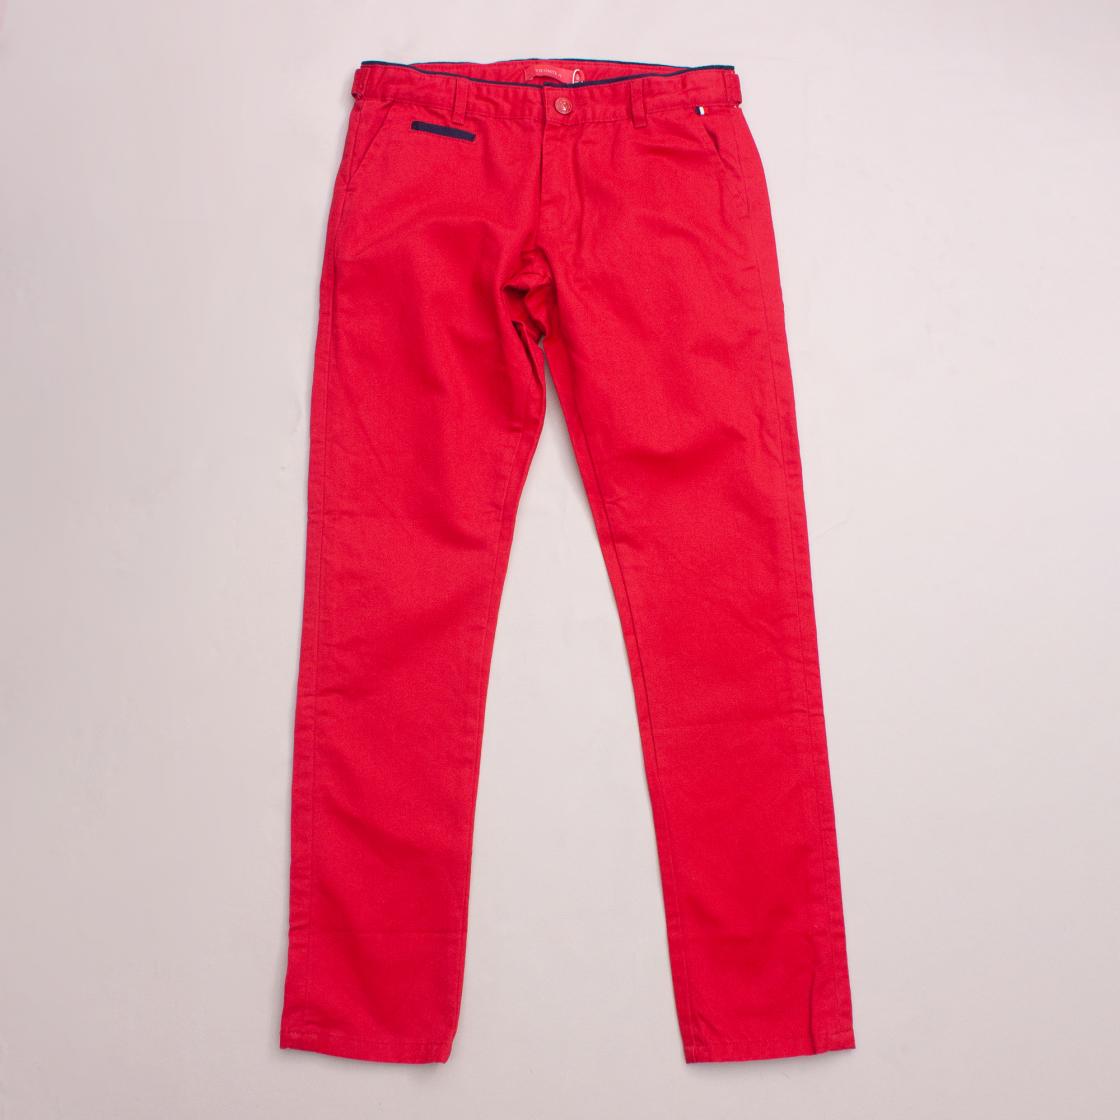 Vicomte Red Pants "Brand New"